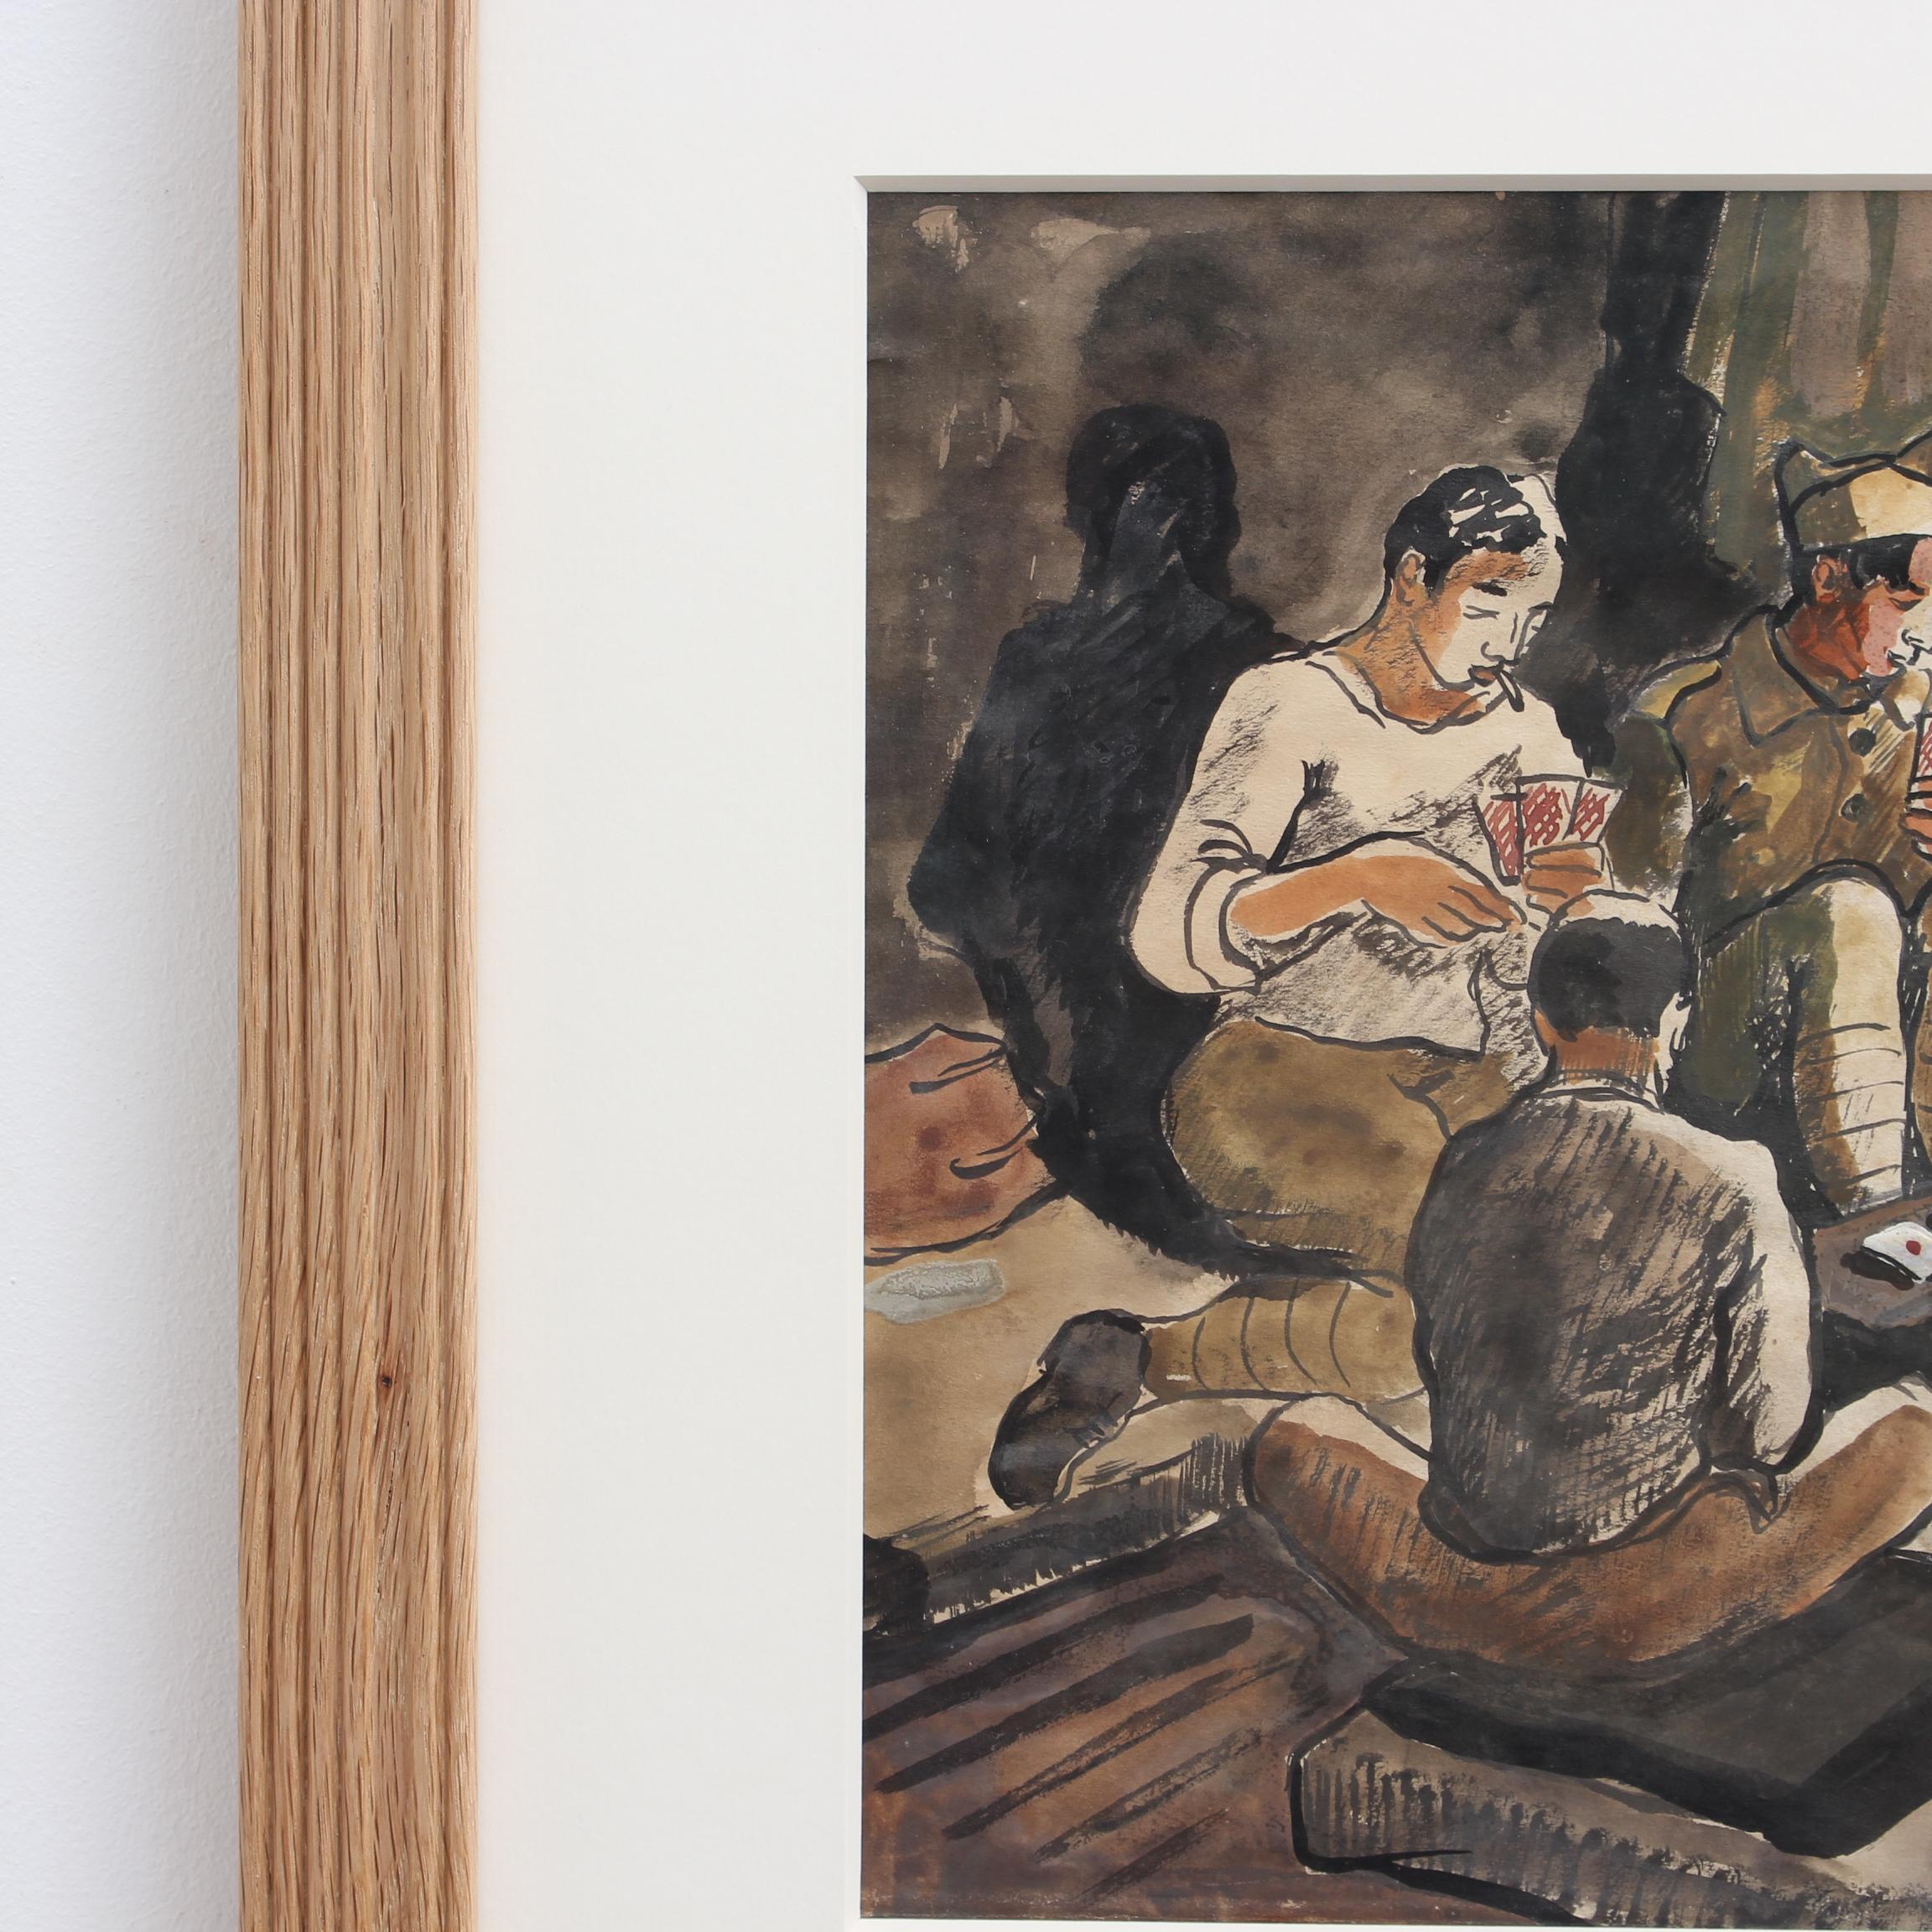 'Soldiers Playing Cards', watercolour and gouache on art paper, by Yves Brayer (1939). Such an atmospheric image, this stunning depiction by celebrated French artist and world traveler, Yves Brayer, captures a moment of repose for soldiers playing